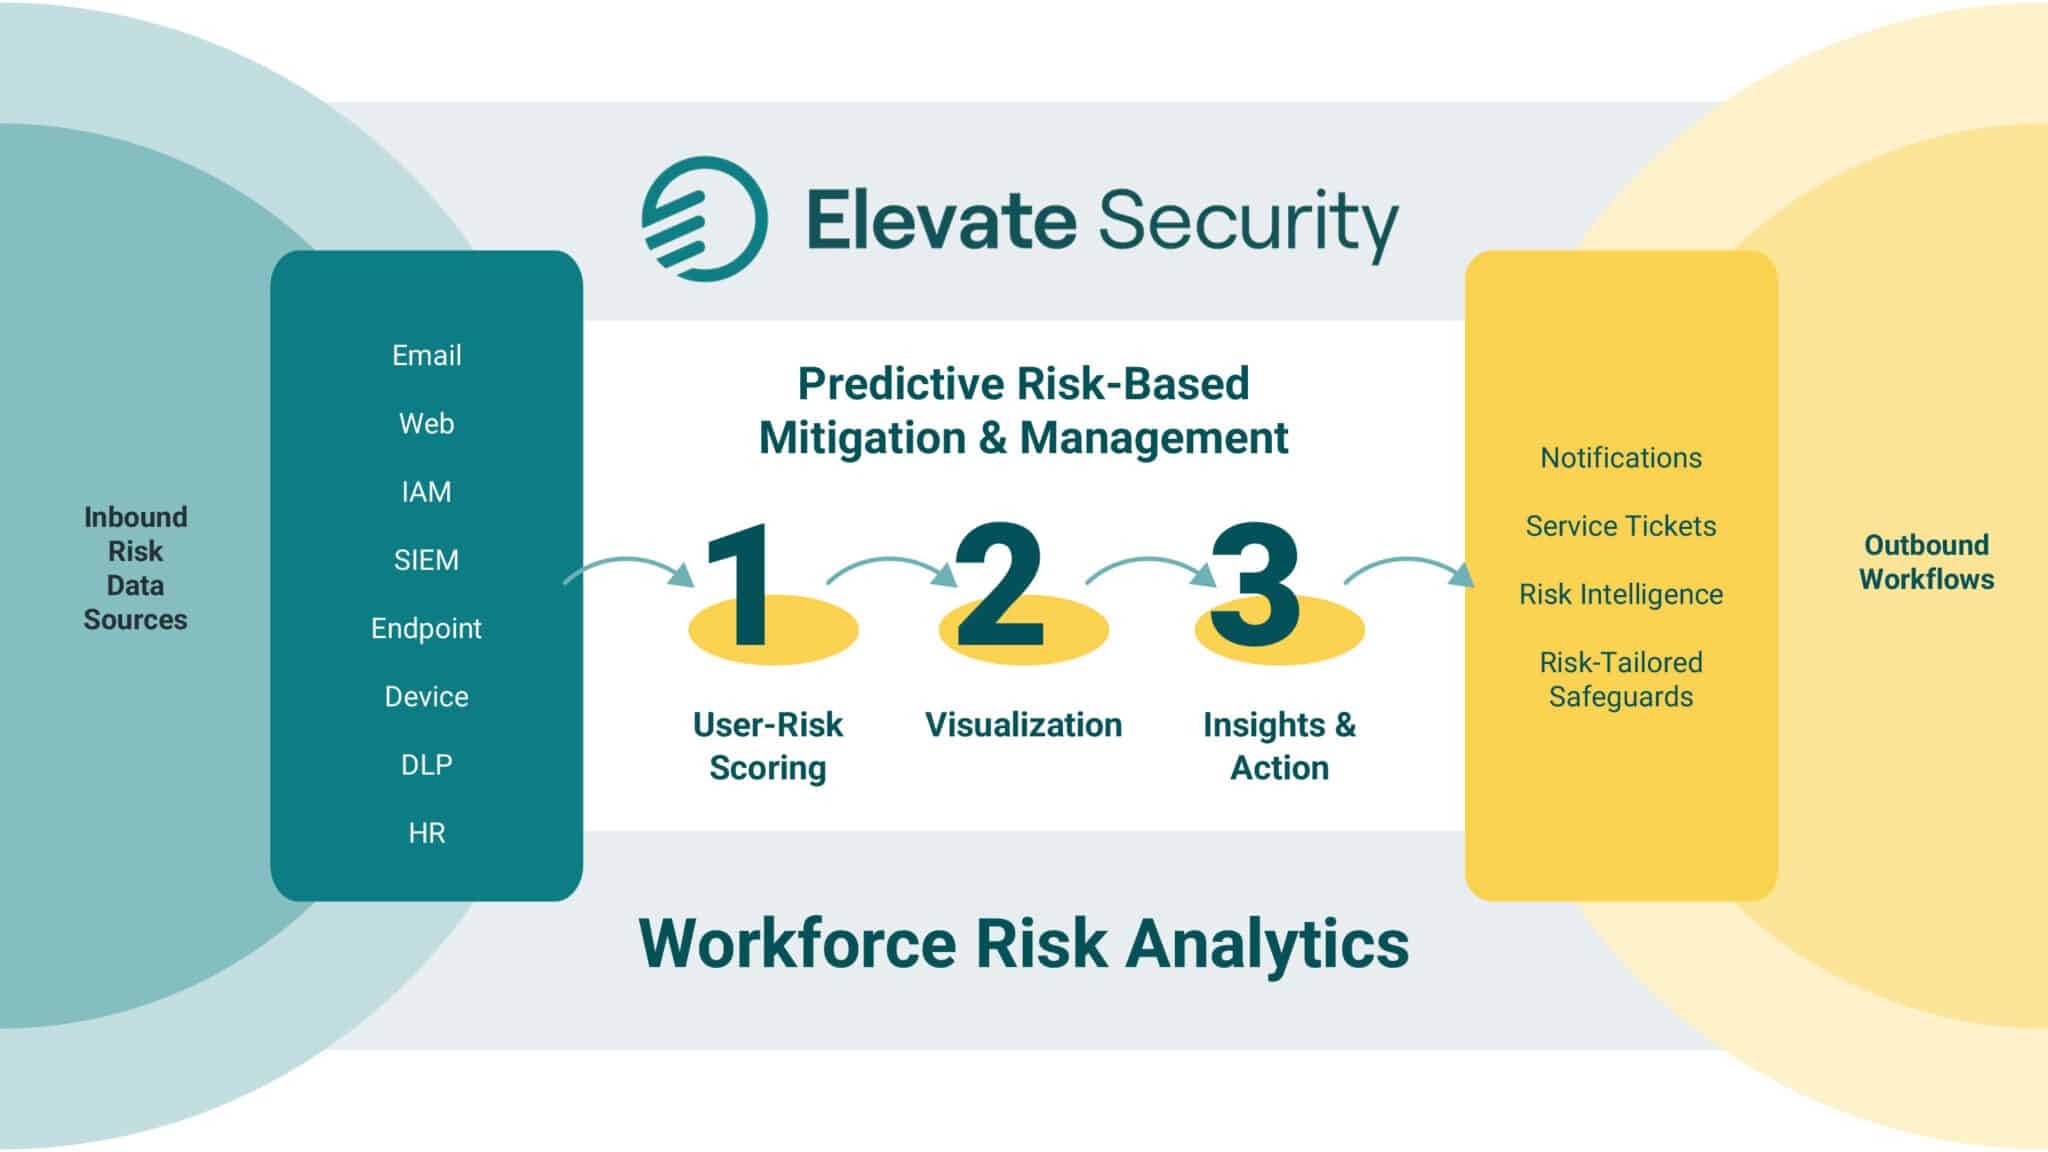 Graphic showing Elevate Security's Predictive Risk-Based Mitigation and Management Process